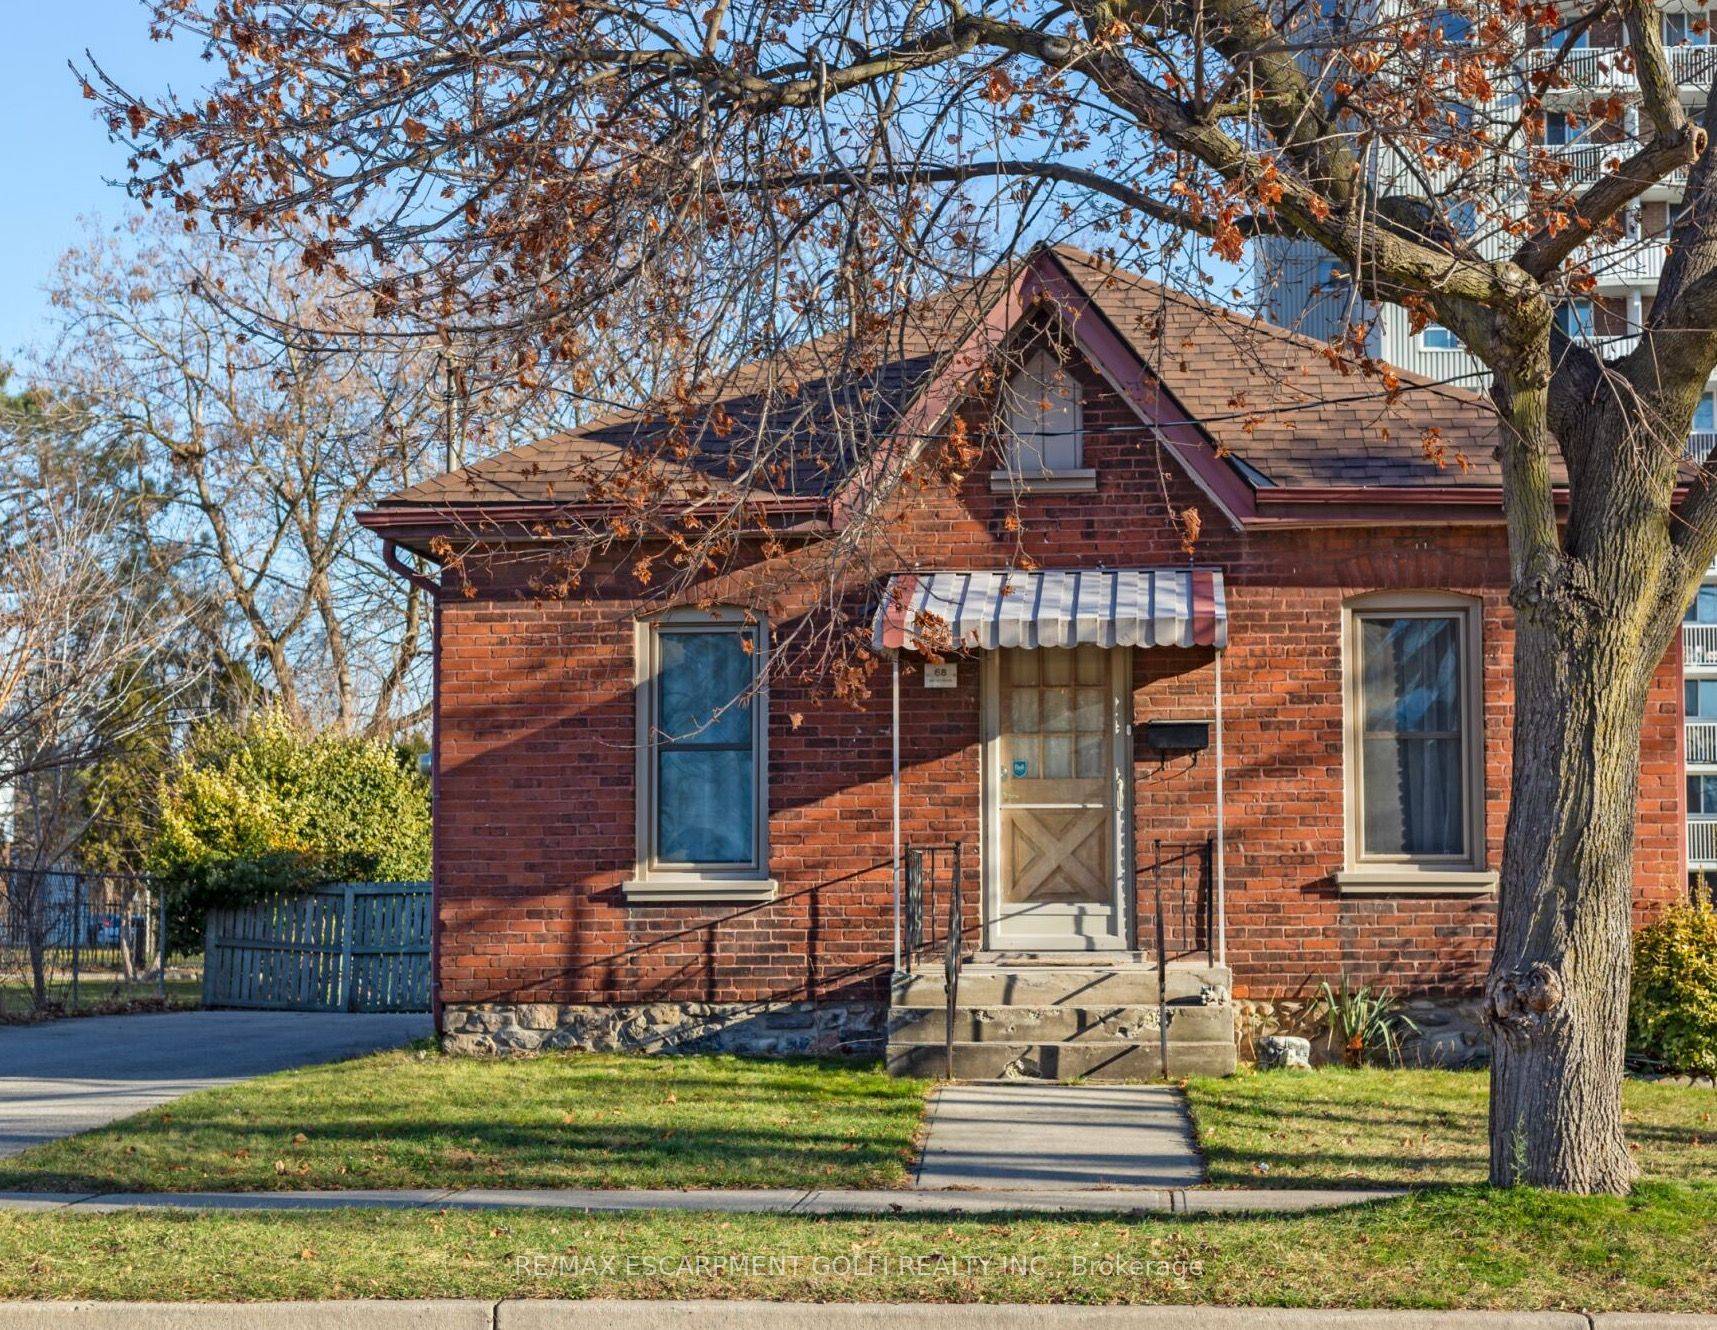 Discover the charm of Old West Brant in this inviting detached brick home on a spacious 46 x 150 lot.